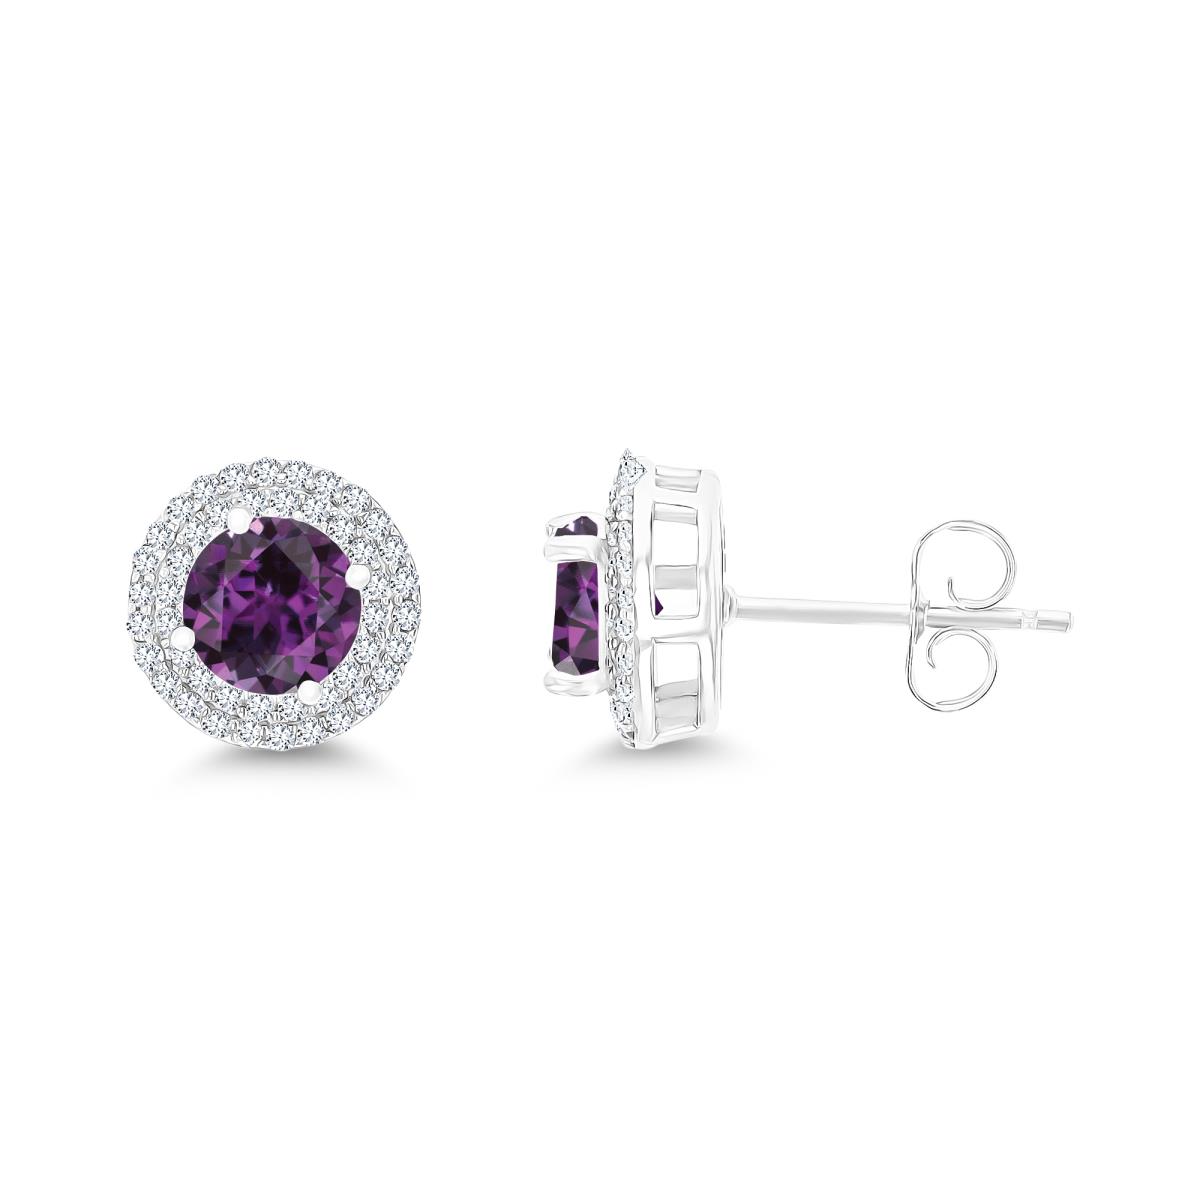 Sterling Silver Rhodium 6mm RD Cr Alexandrite / Cr White Sapphire Double Halo Stud Earring